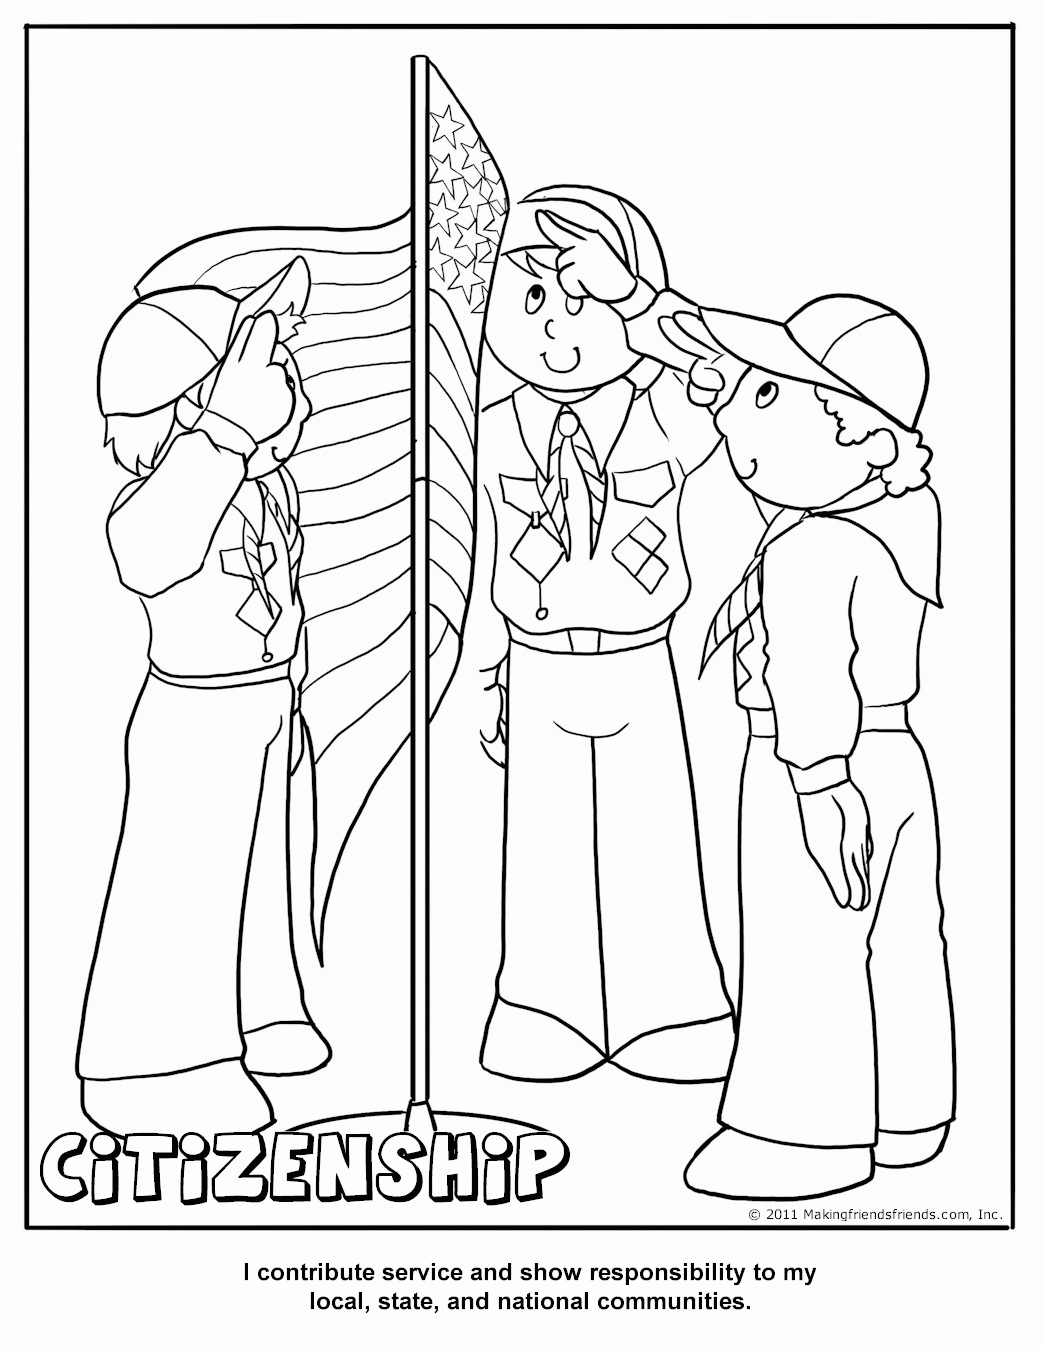 cub-scout-coloring-pages.jpg